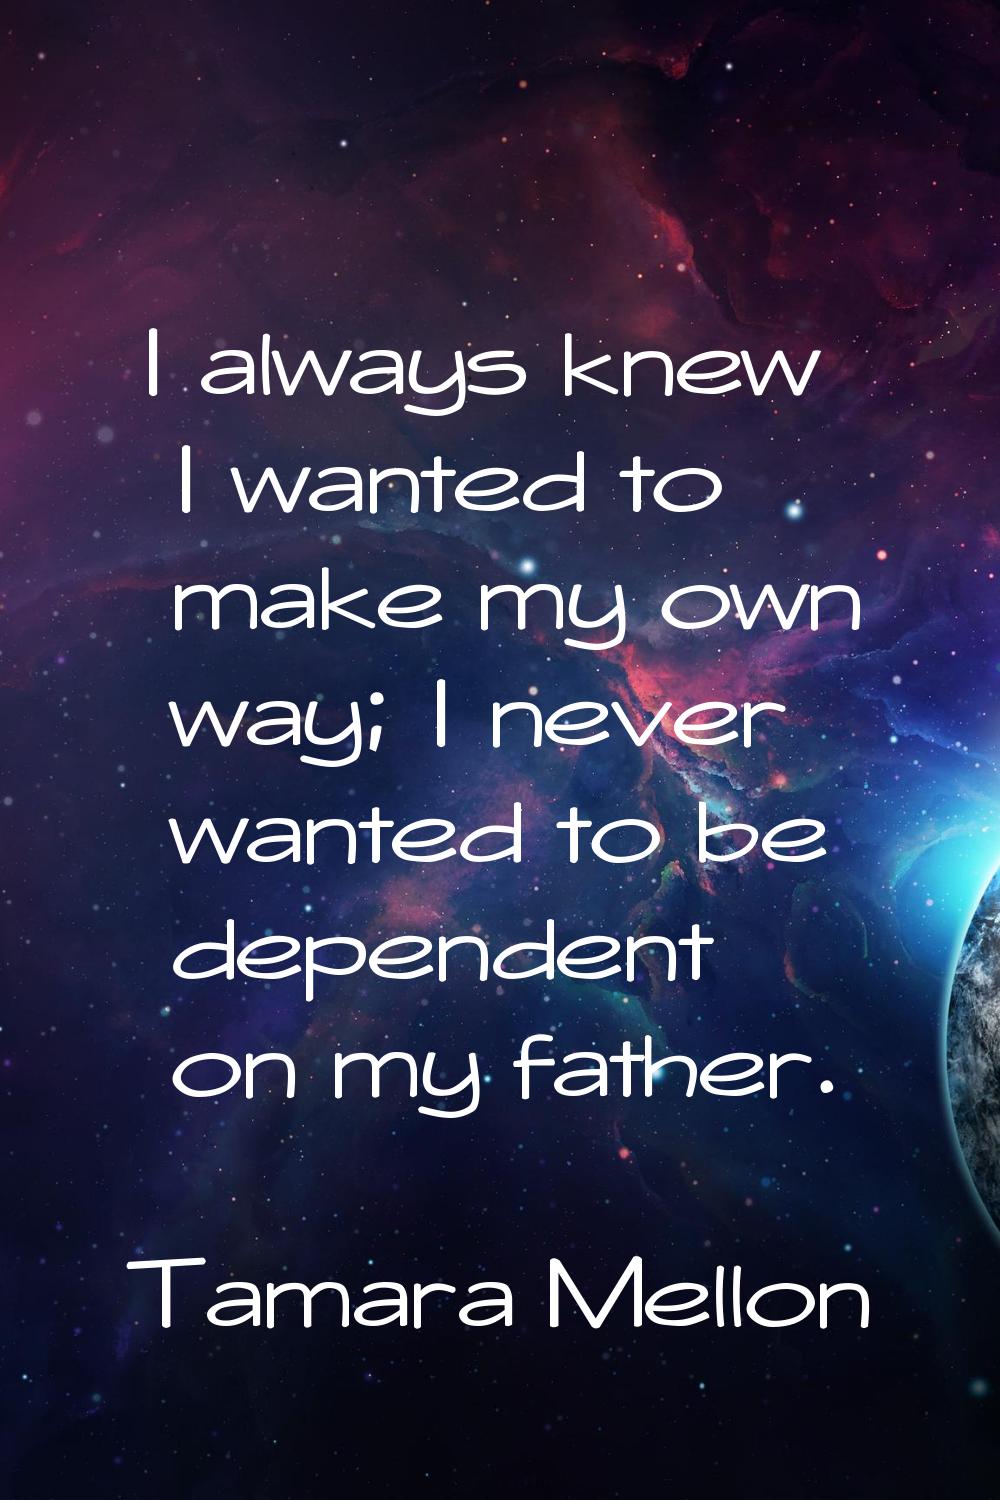 I always knew I wanted to make my own way; I never wanted to be dependent on my father.